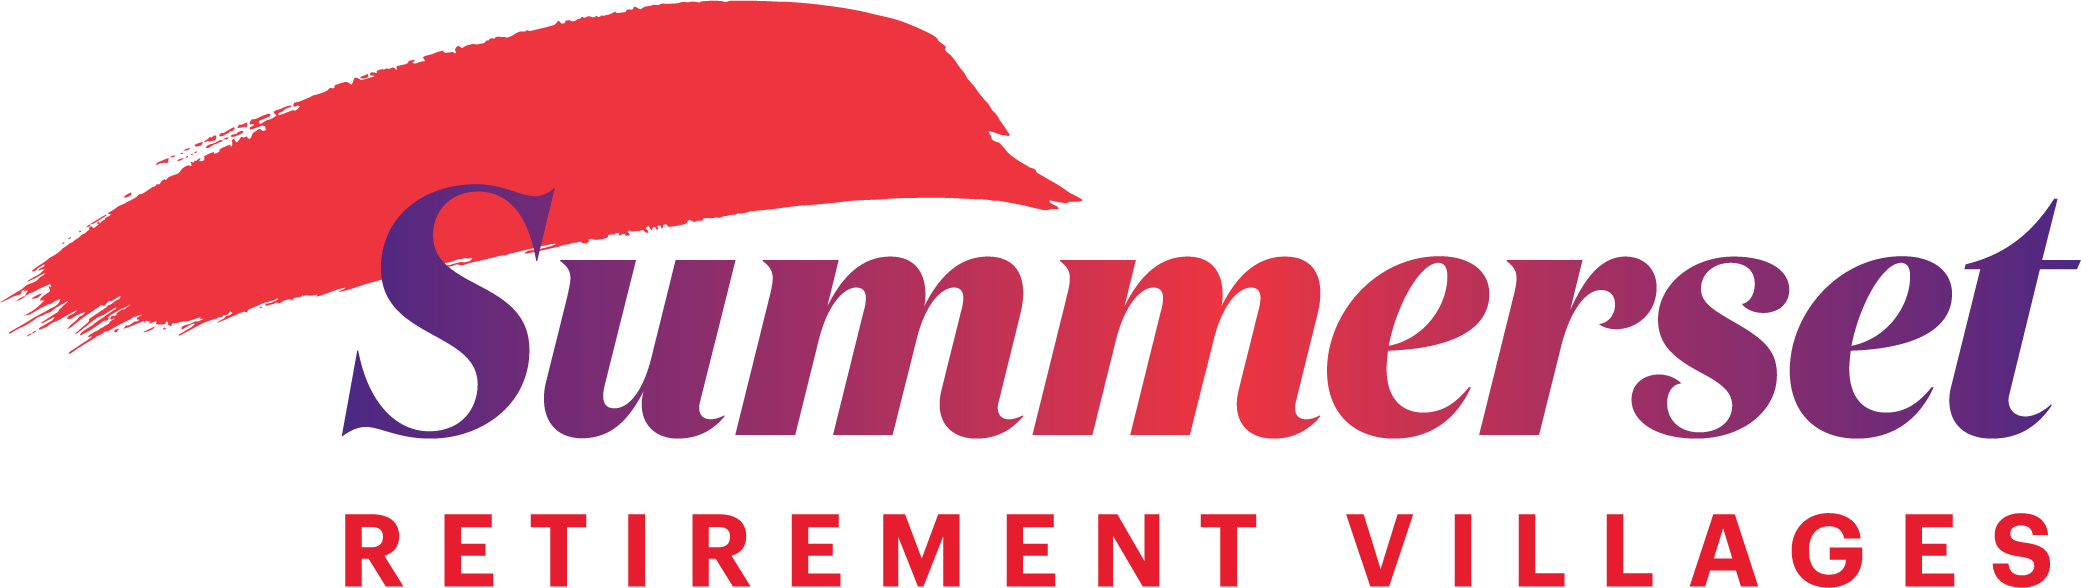 Summerset Mountain View, New Plymouth logo